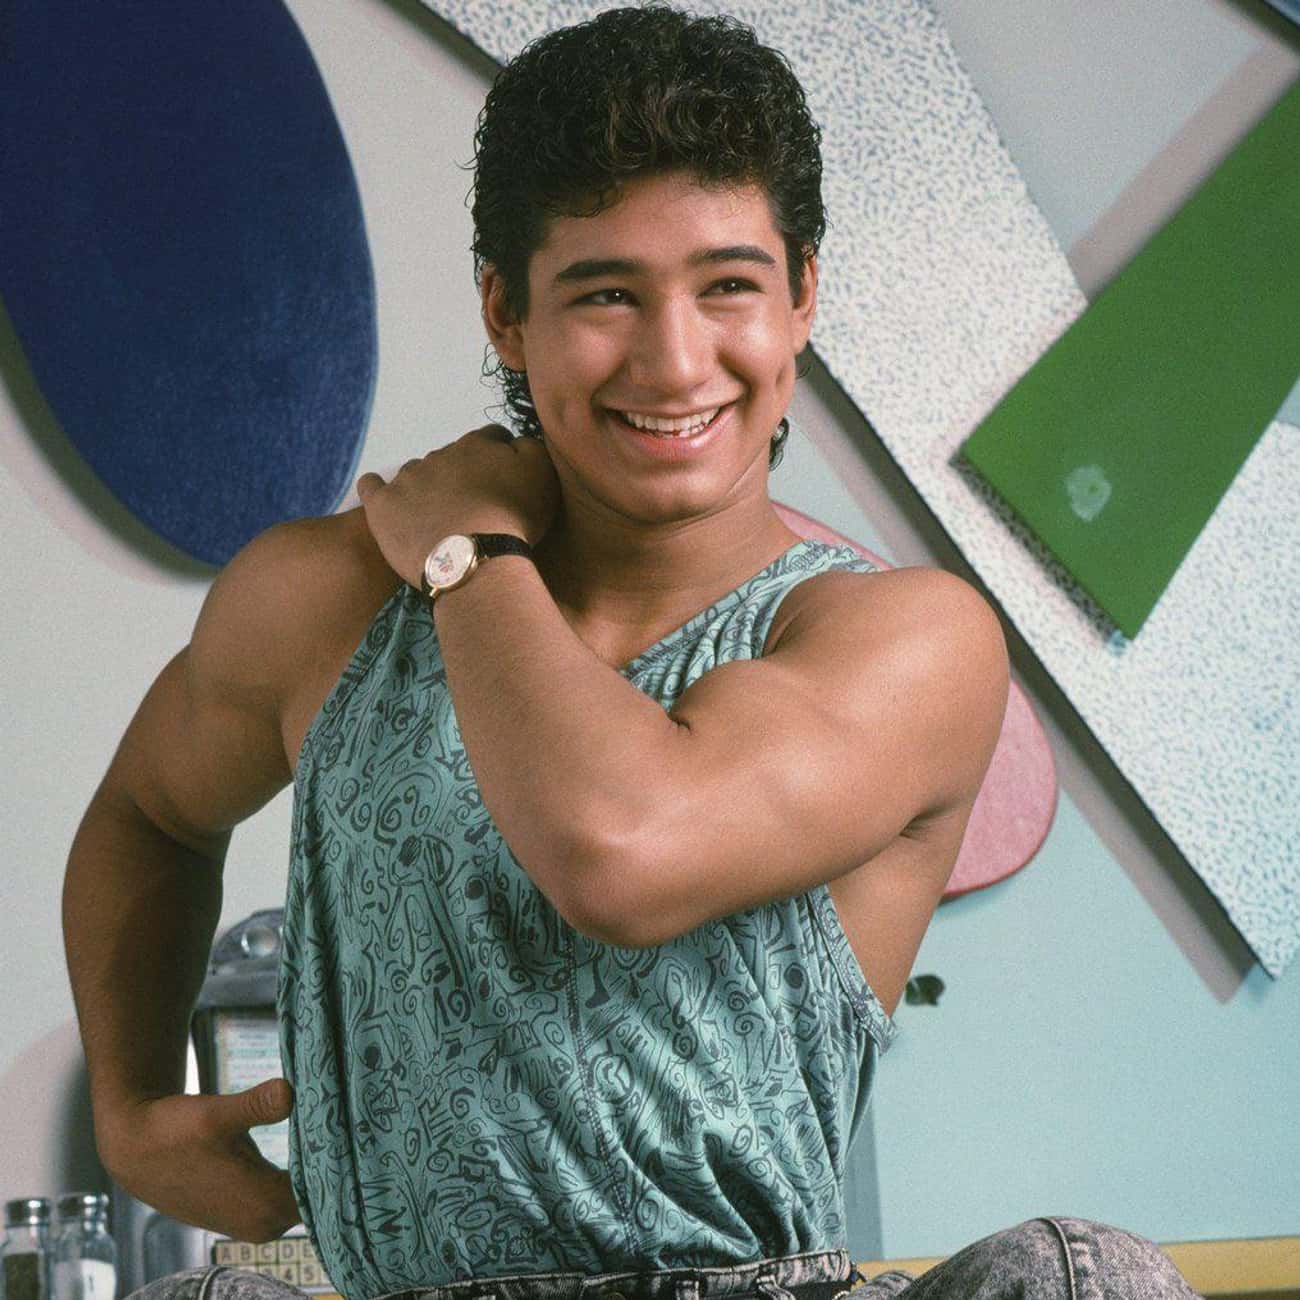 Mario Lopez Allegedly Sexually Assaulted A Woman